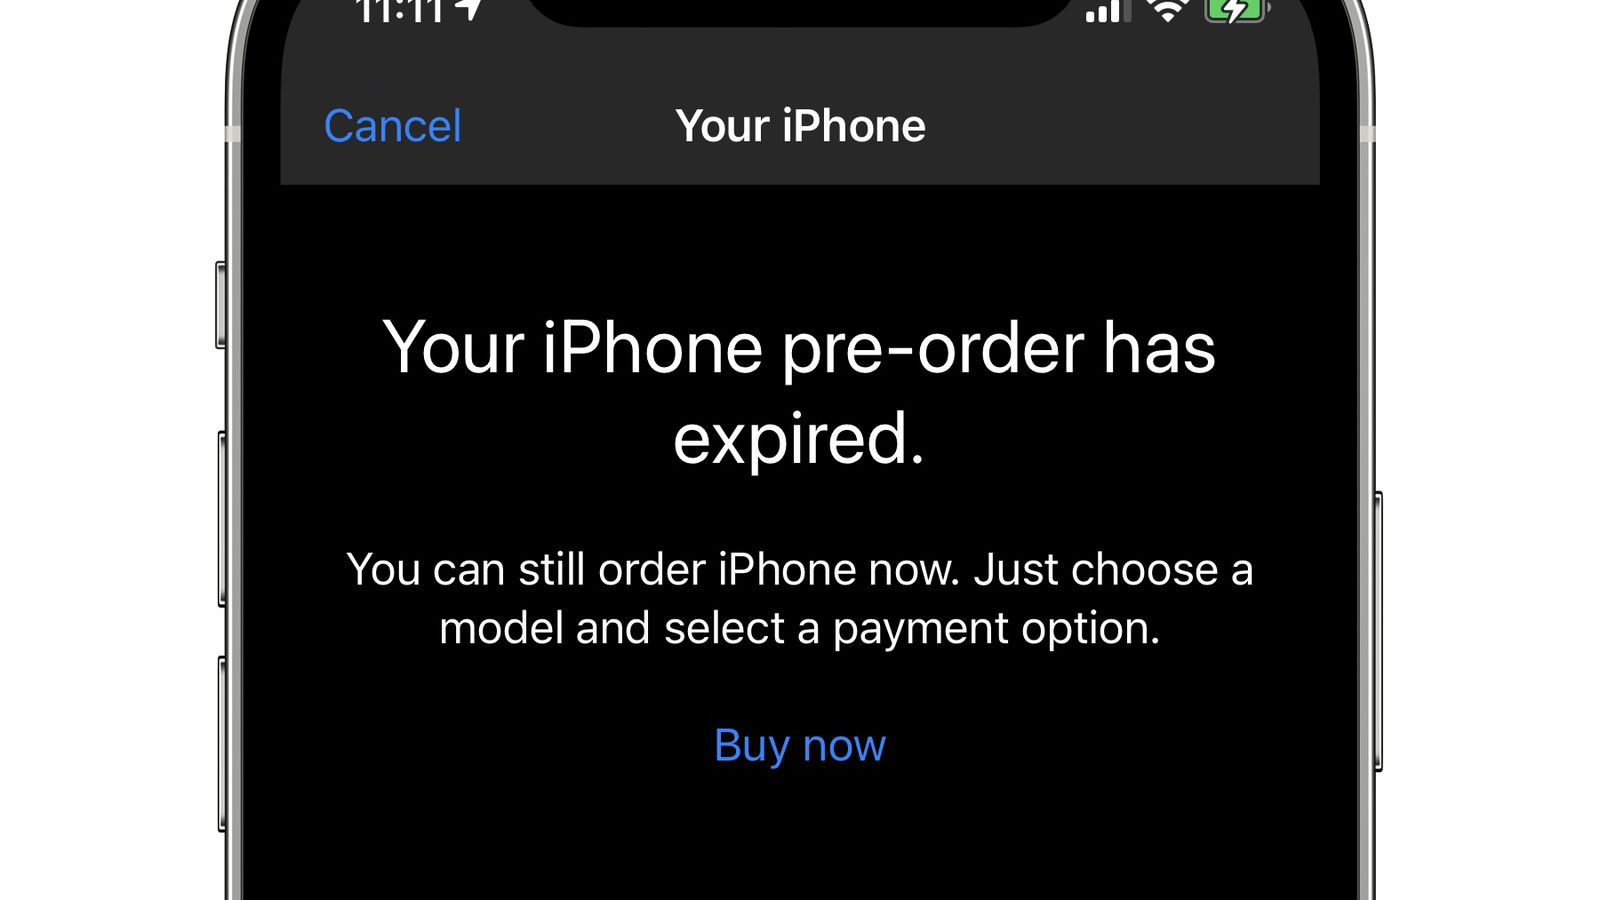 PSA: Preorders are at 5am PDT, not 12 : r/iphone